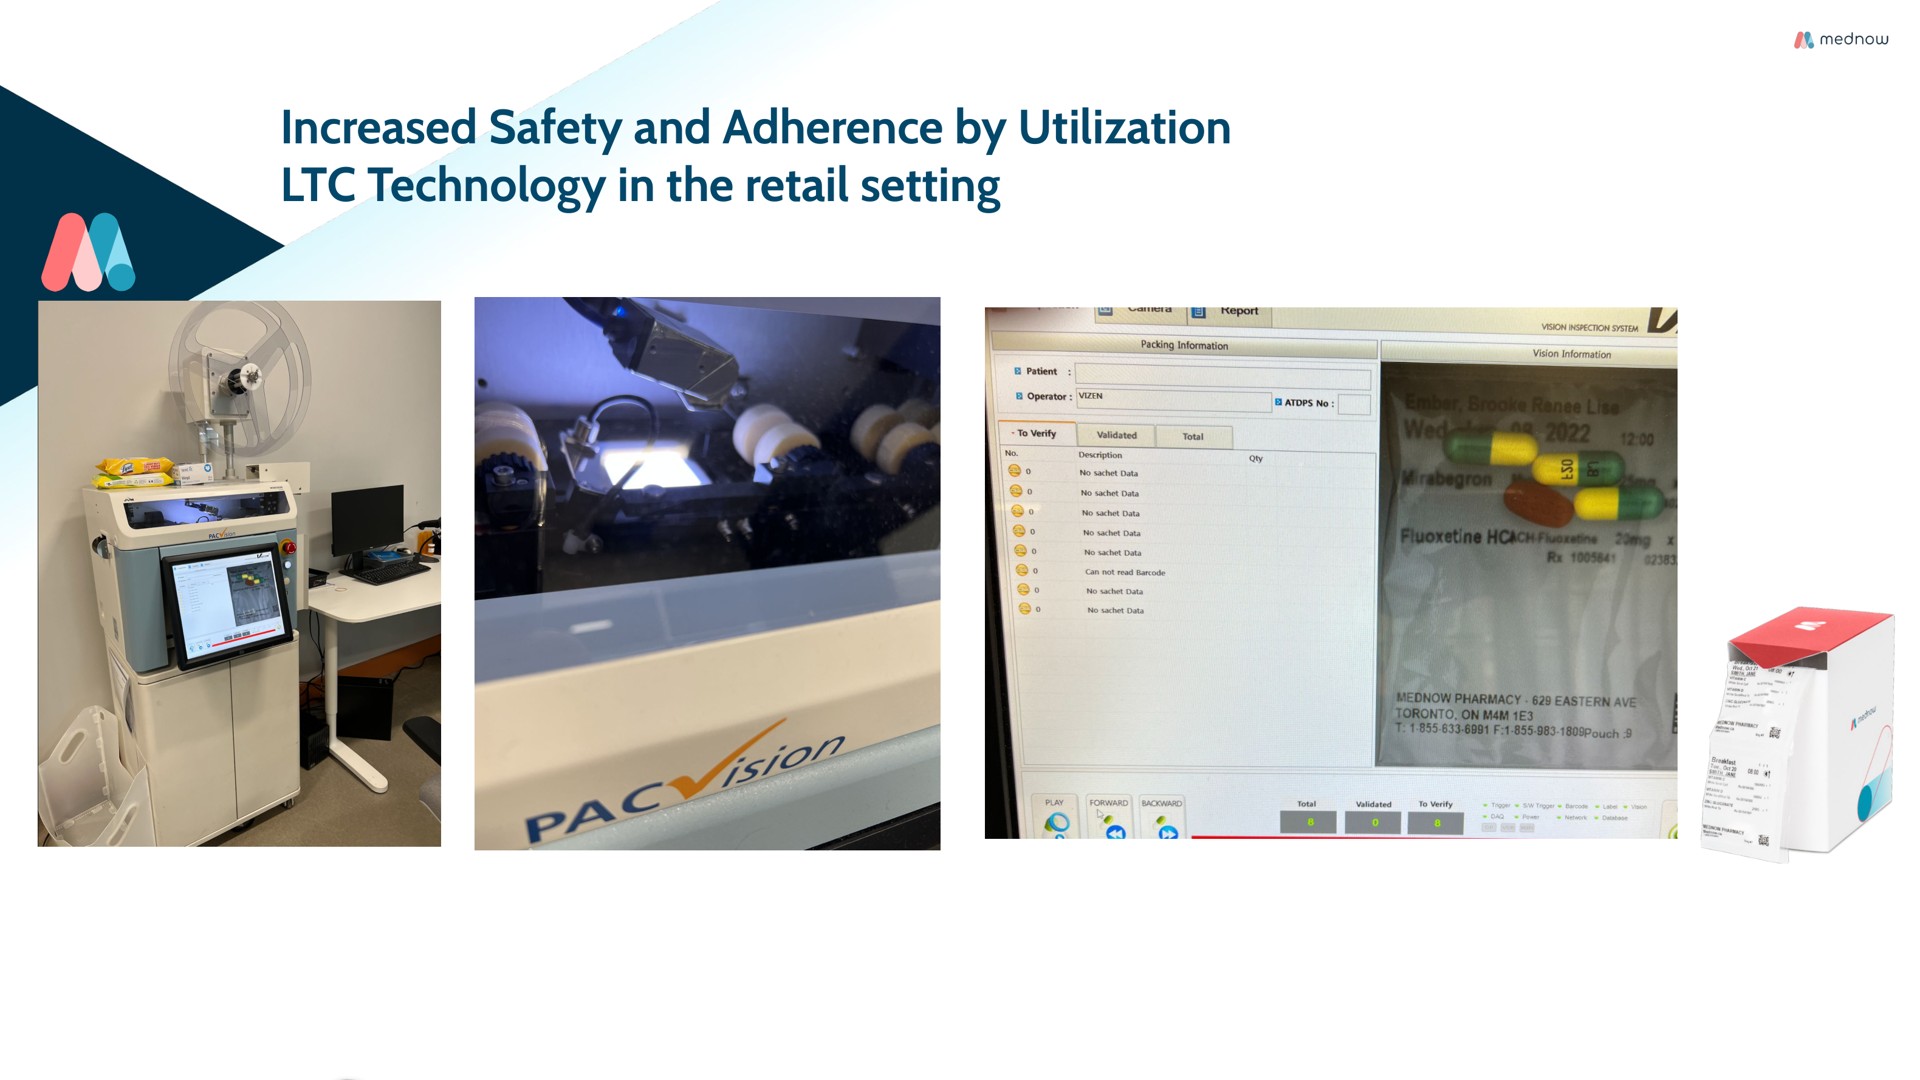 increased safety and adherence by utilization technology in the retail setting | Mednow